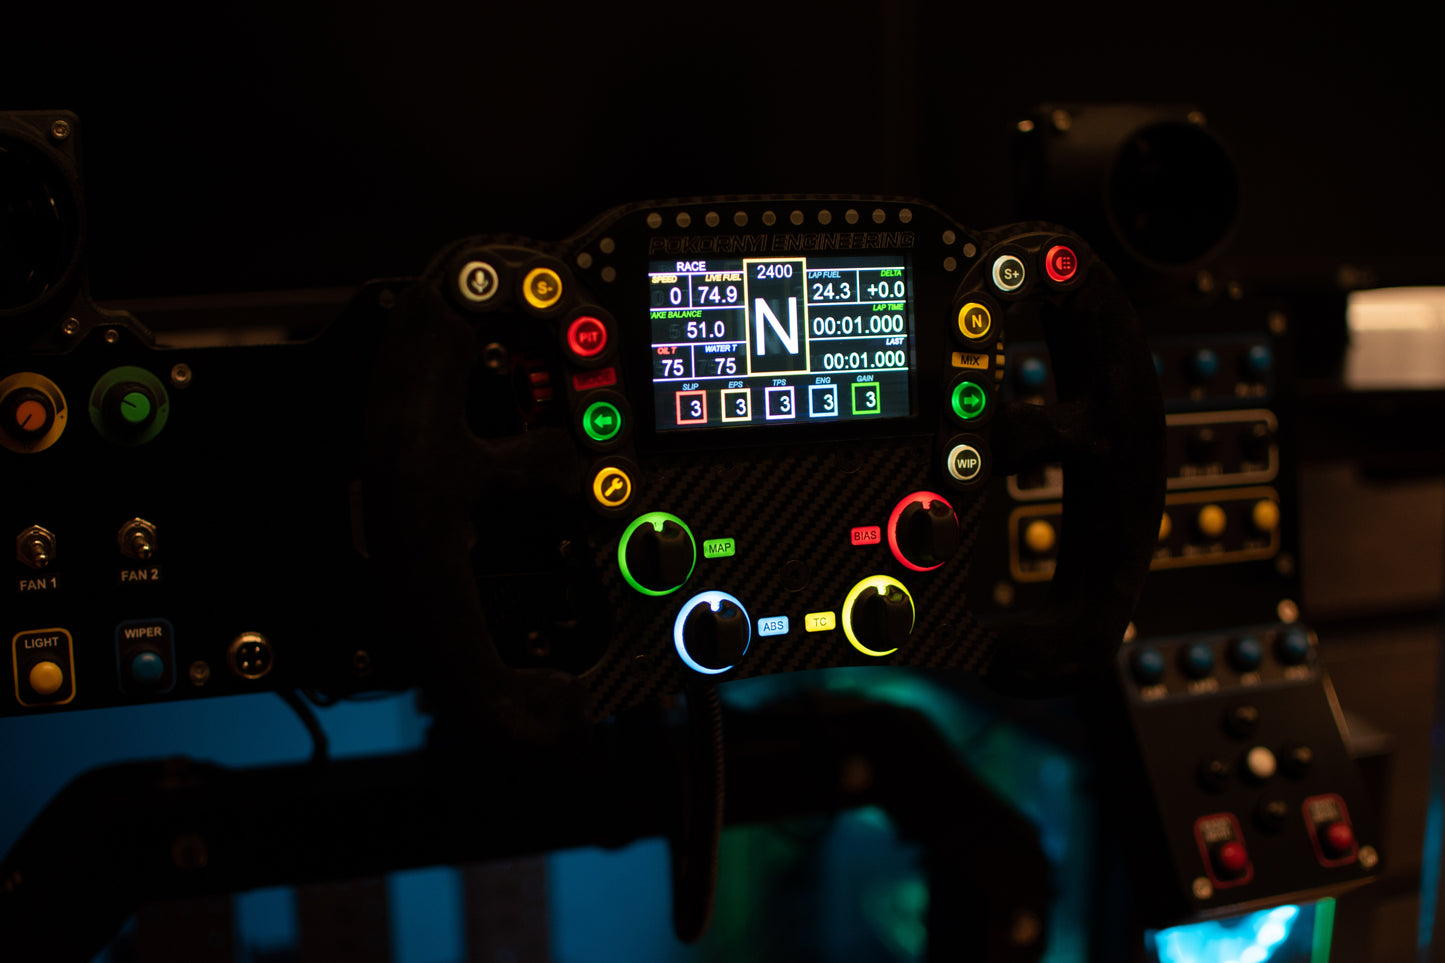 LMP PRO DIY steering wheel with illuminated LED buttons